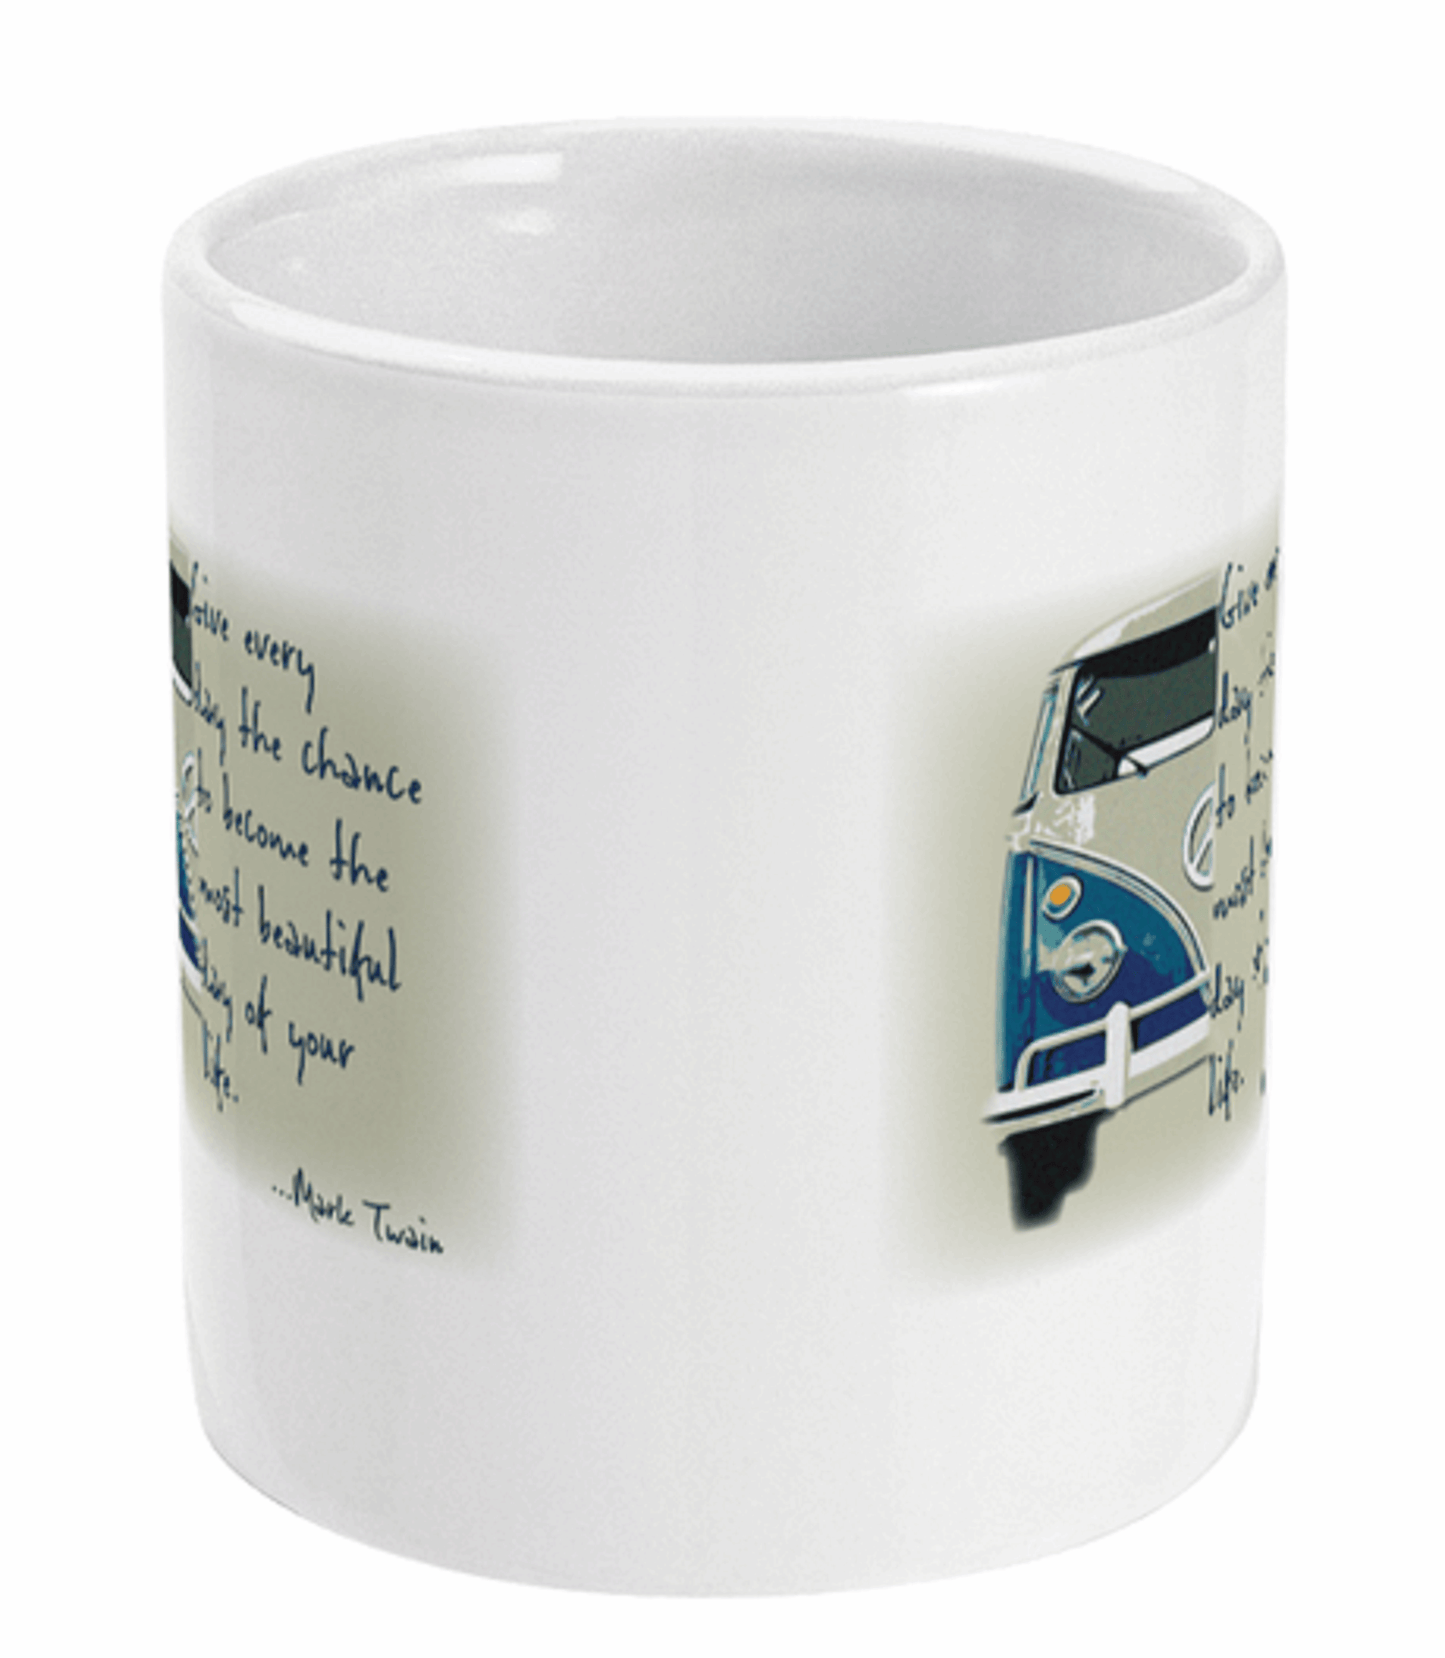  Give Everyday The Chance Camper Van Mug by Free Spirit Accessories sold by Free Spirit Accessories